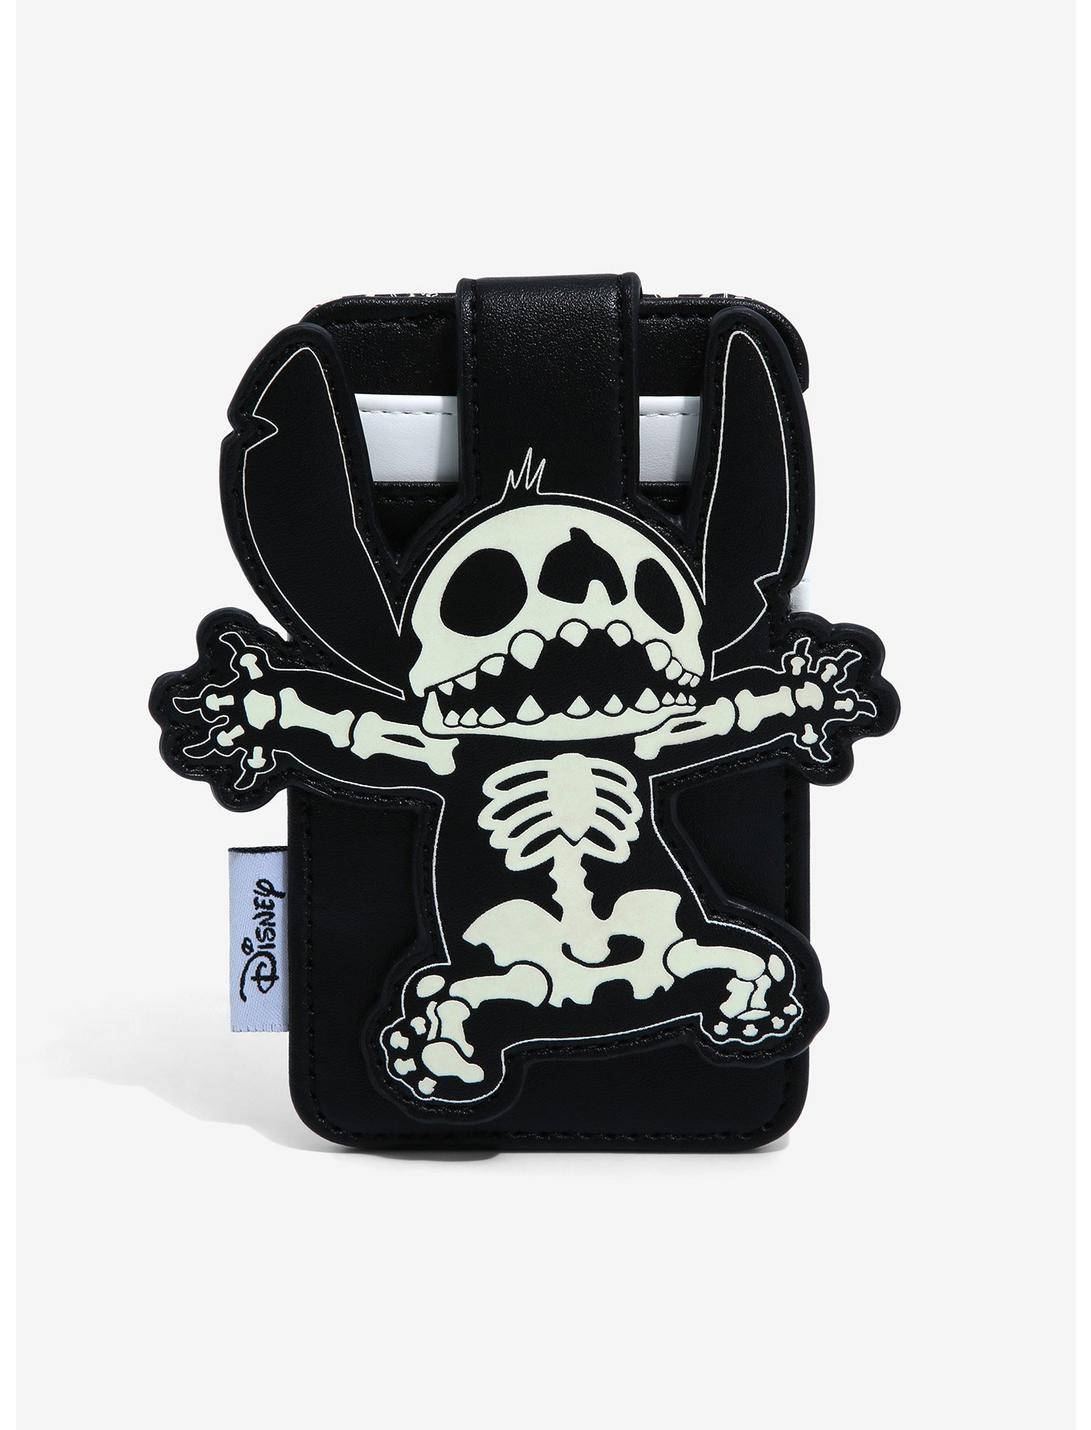 Loungefly Disney Lilo & Stitch Skeleton Cardholder Loungefly Summer Convention Exclusive, , hi-res